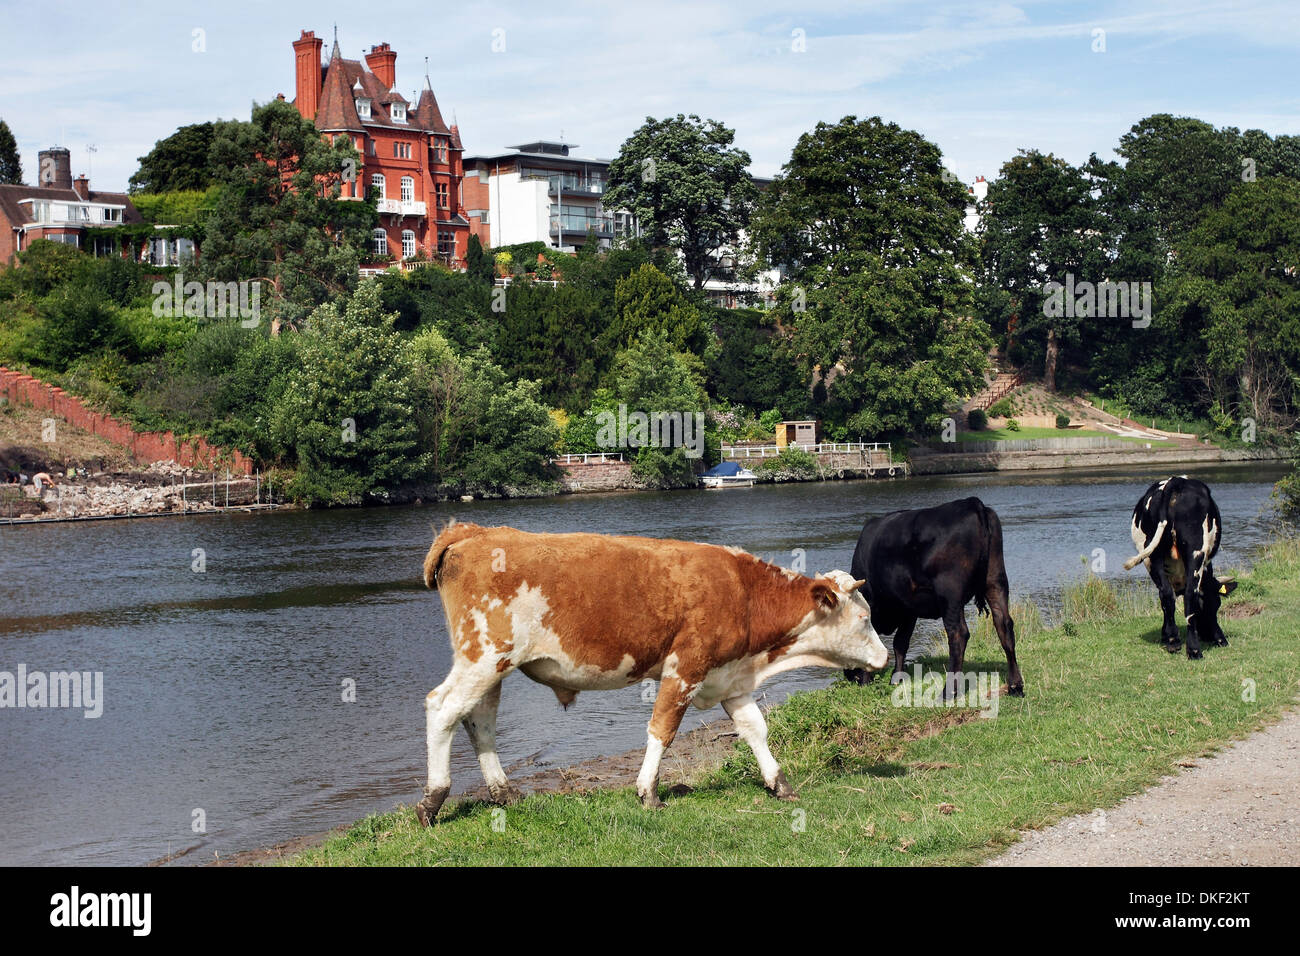 Cattle grazing on the banks of the River Dee in Chester, England,with riverside properties in the background. Stock Photo